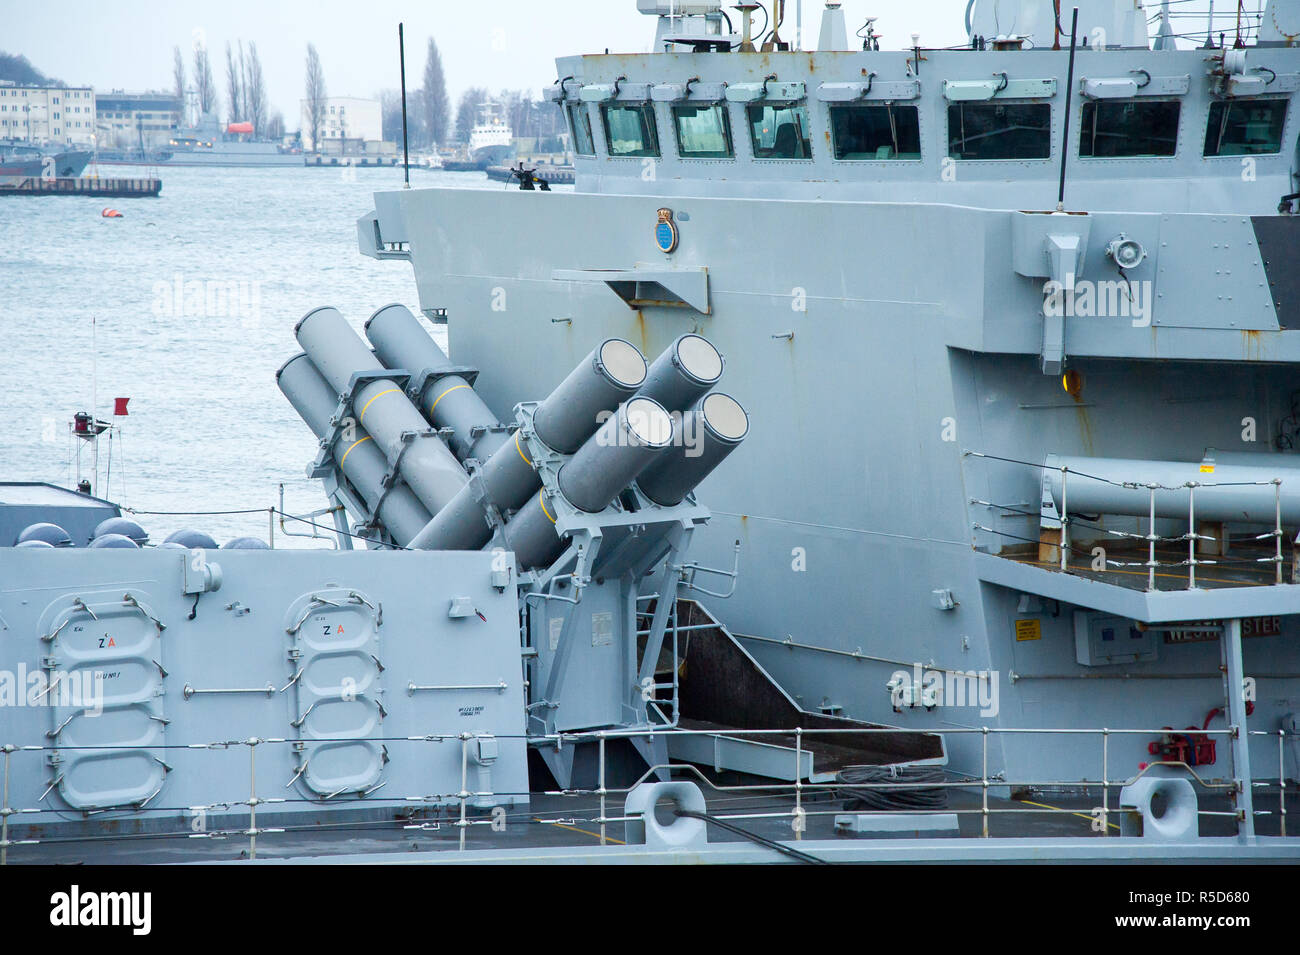 Gdynia, Poland. 30th November, 2018. MBDA Sea Ceptor with CAAMM (Common Anti-Air Modular Missile) with short or medium range anti-aircraft and anti-missile missile, RGM-84 Harpoon anti-ship missile launching system of British Type 23 frigate or Duke-class frigate HMS Westminster F237 is seen in Port of Gdynia, Poland. 30th November 2018. The vessel was used for the interior shots in the 1997 James Bond film Tomorrow Never Dies © Wojciech Strozyk / Alamy Live News Stock Photo